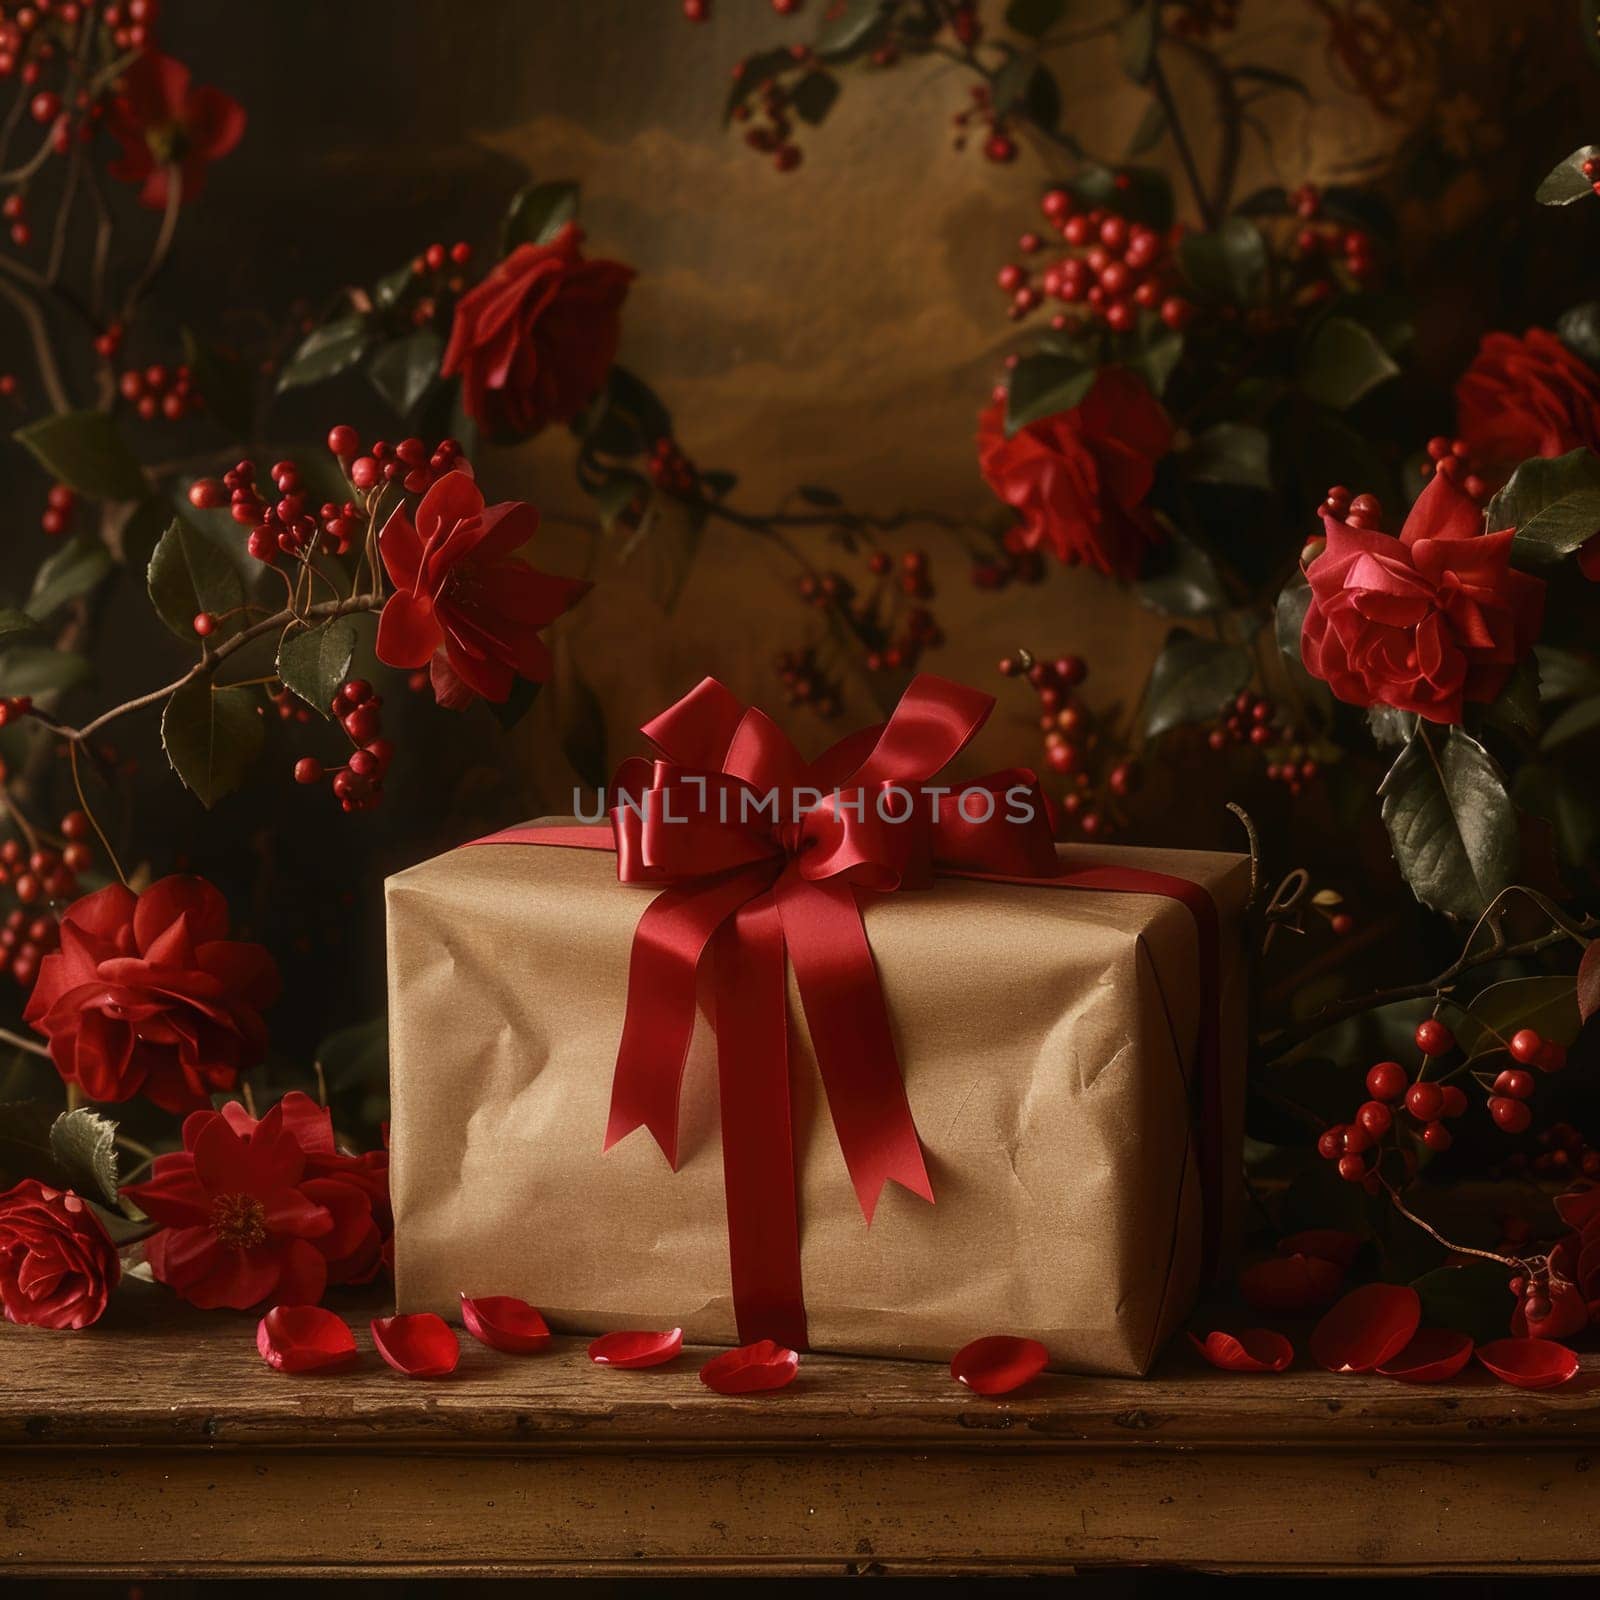 A present box with a red bow placed on a wooden table.